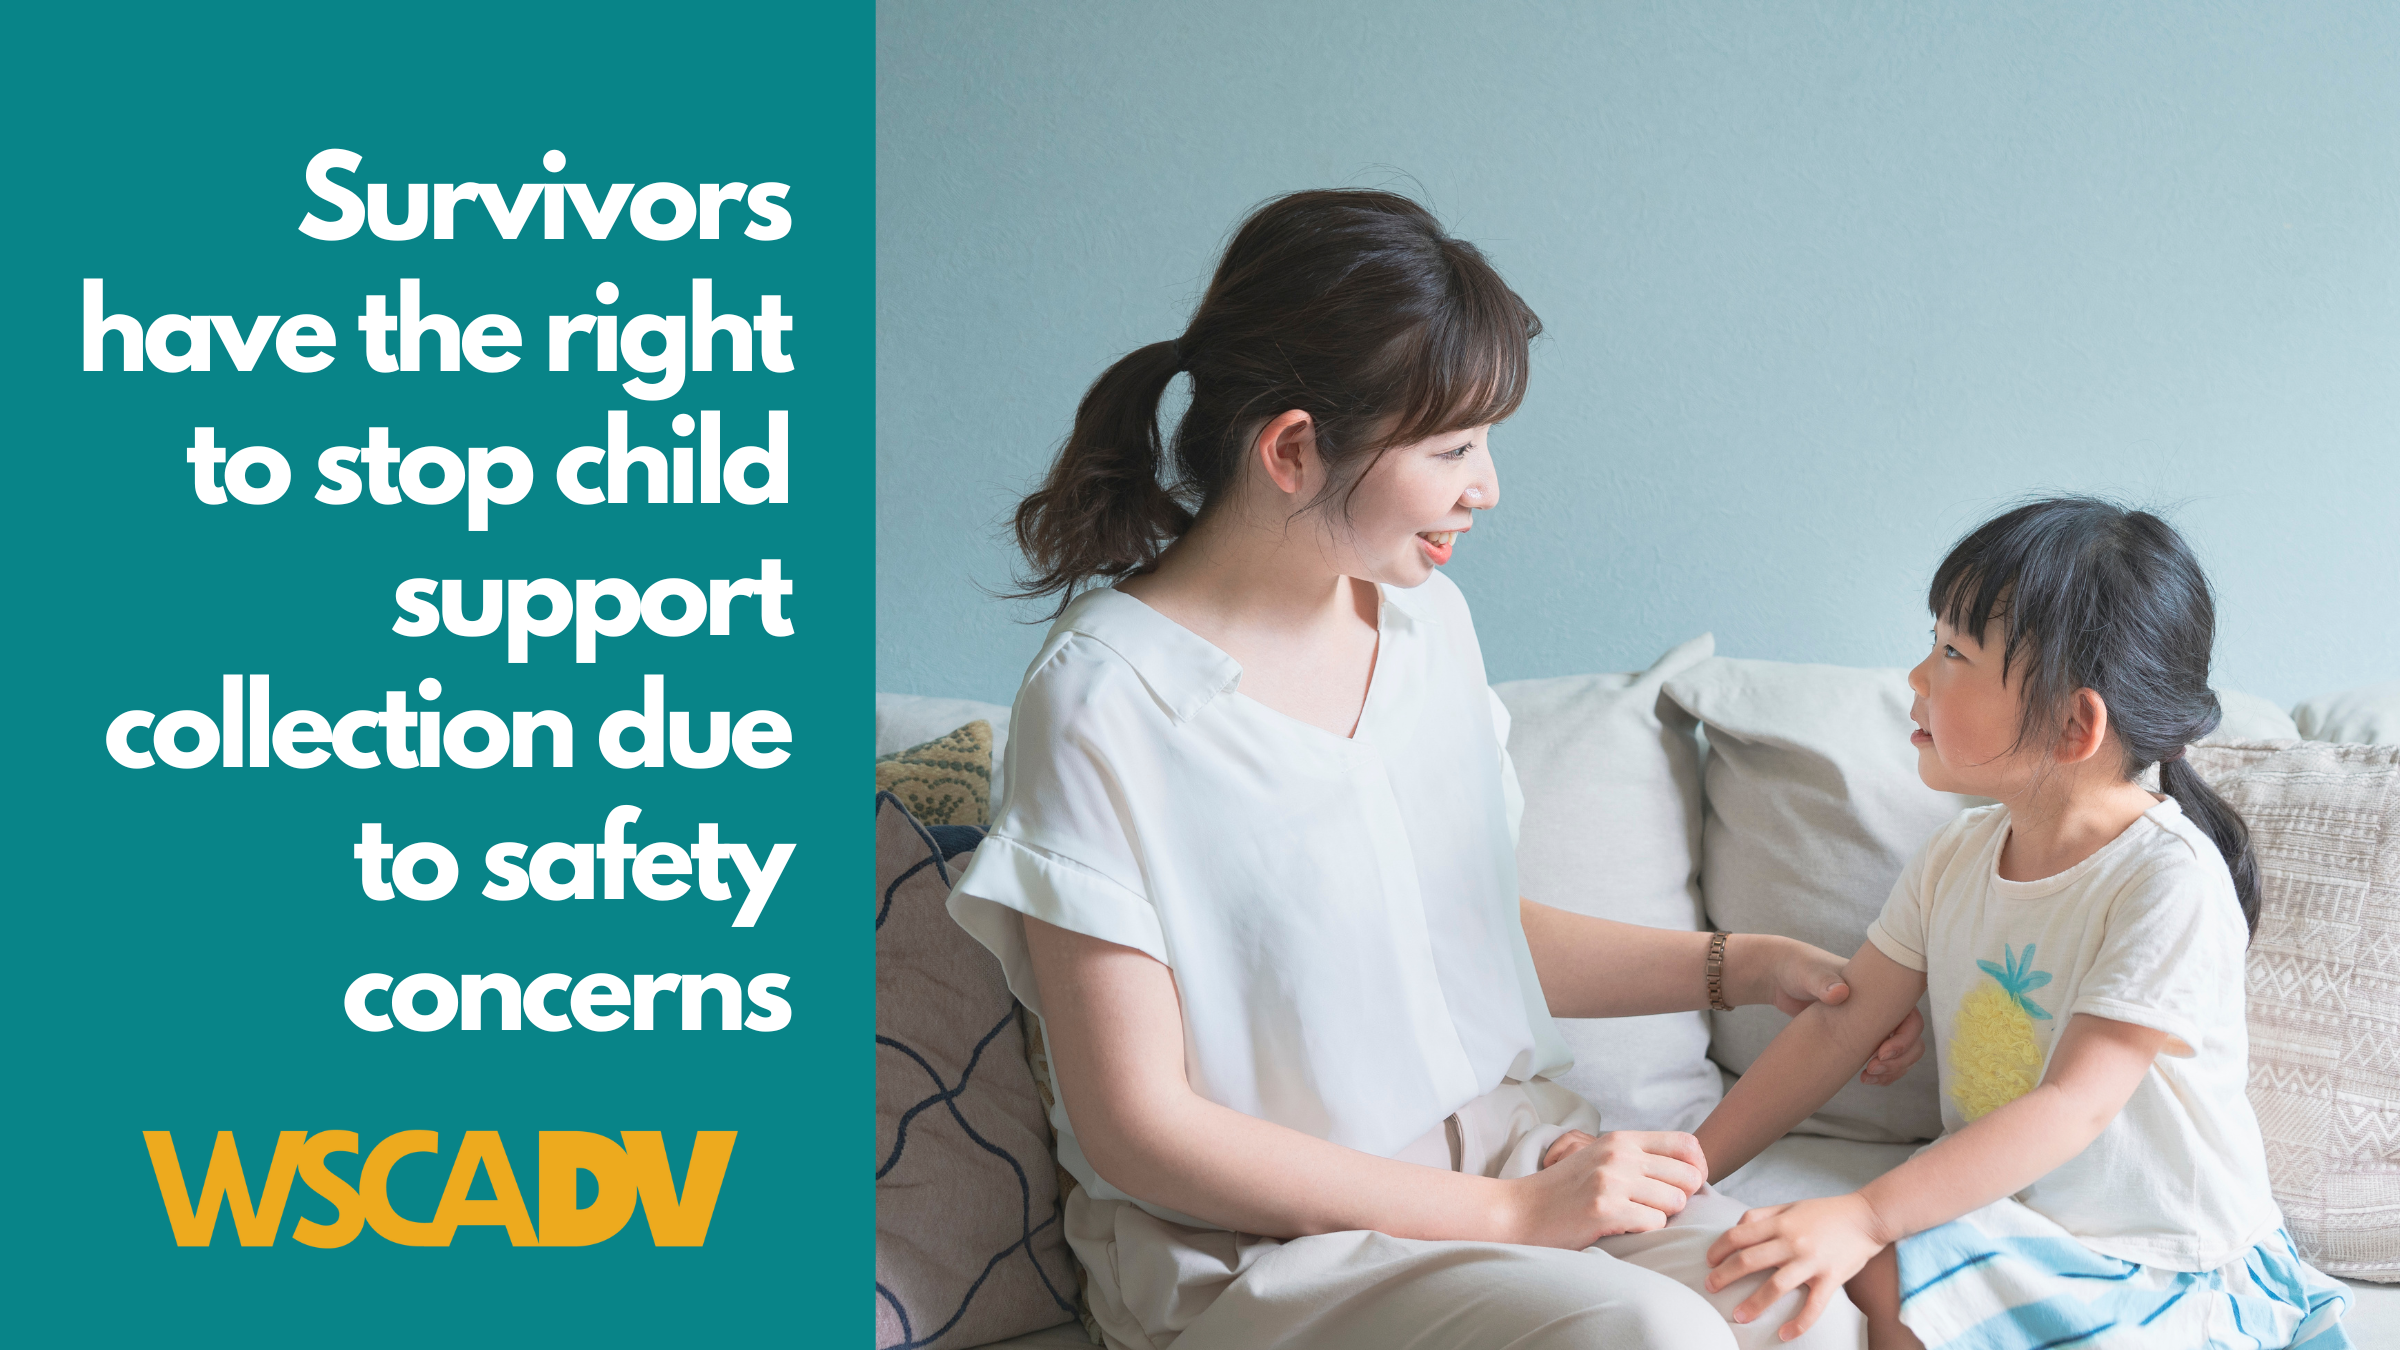 An Asian mom and daughter sit together on a couch smiling and looking at each other. Text says "Survivors have the right to stop child support collection due to safety concerns" with WSCADV logo.